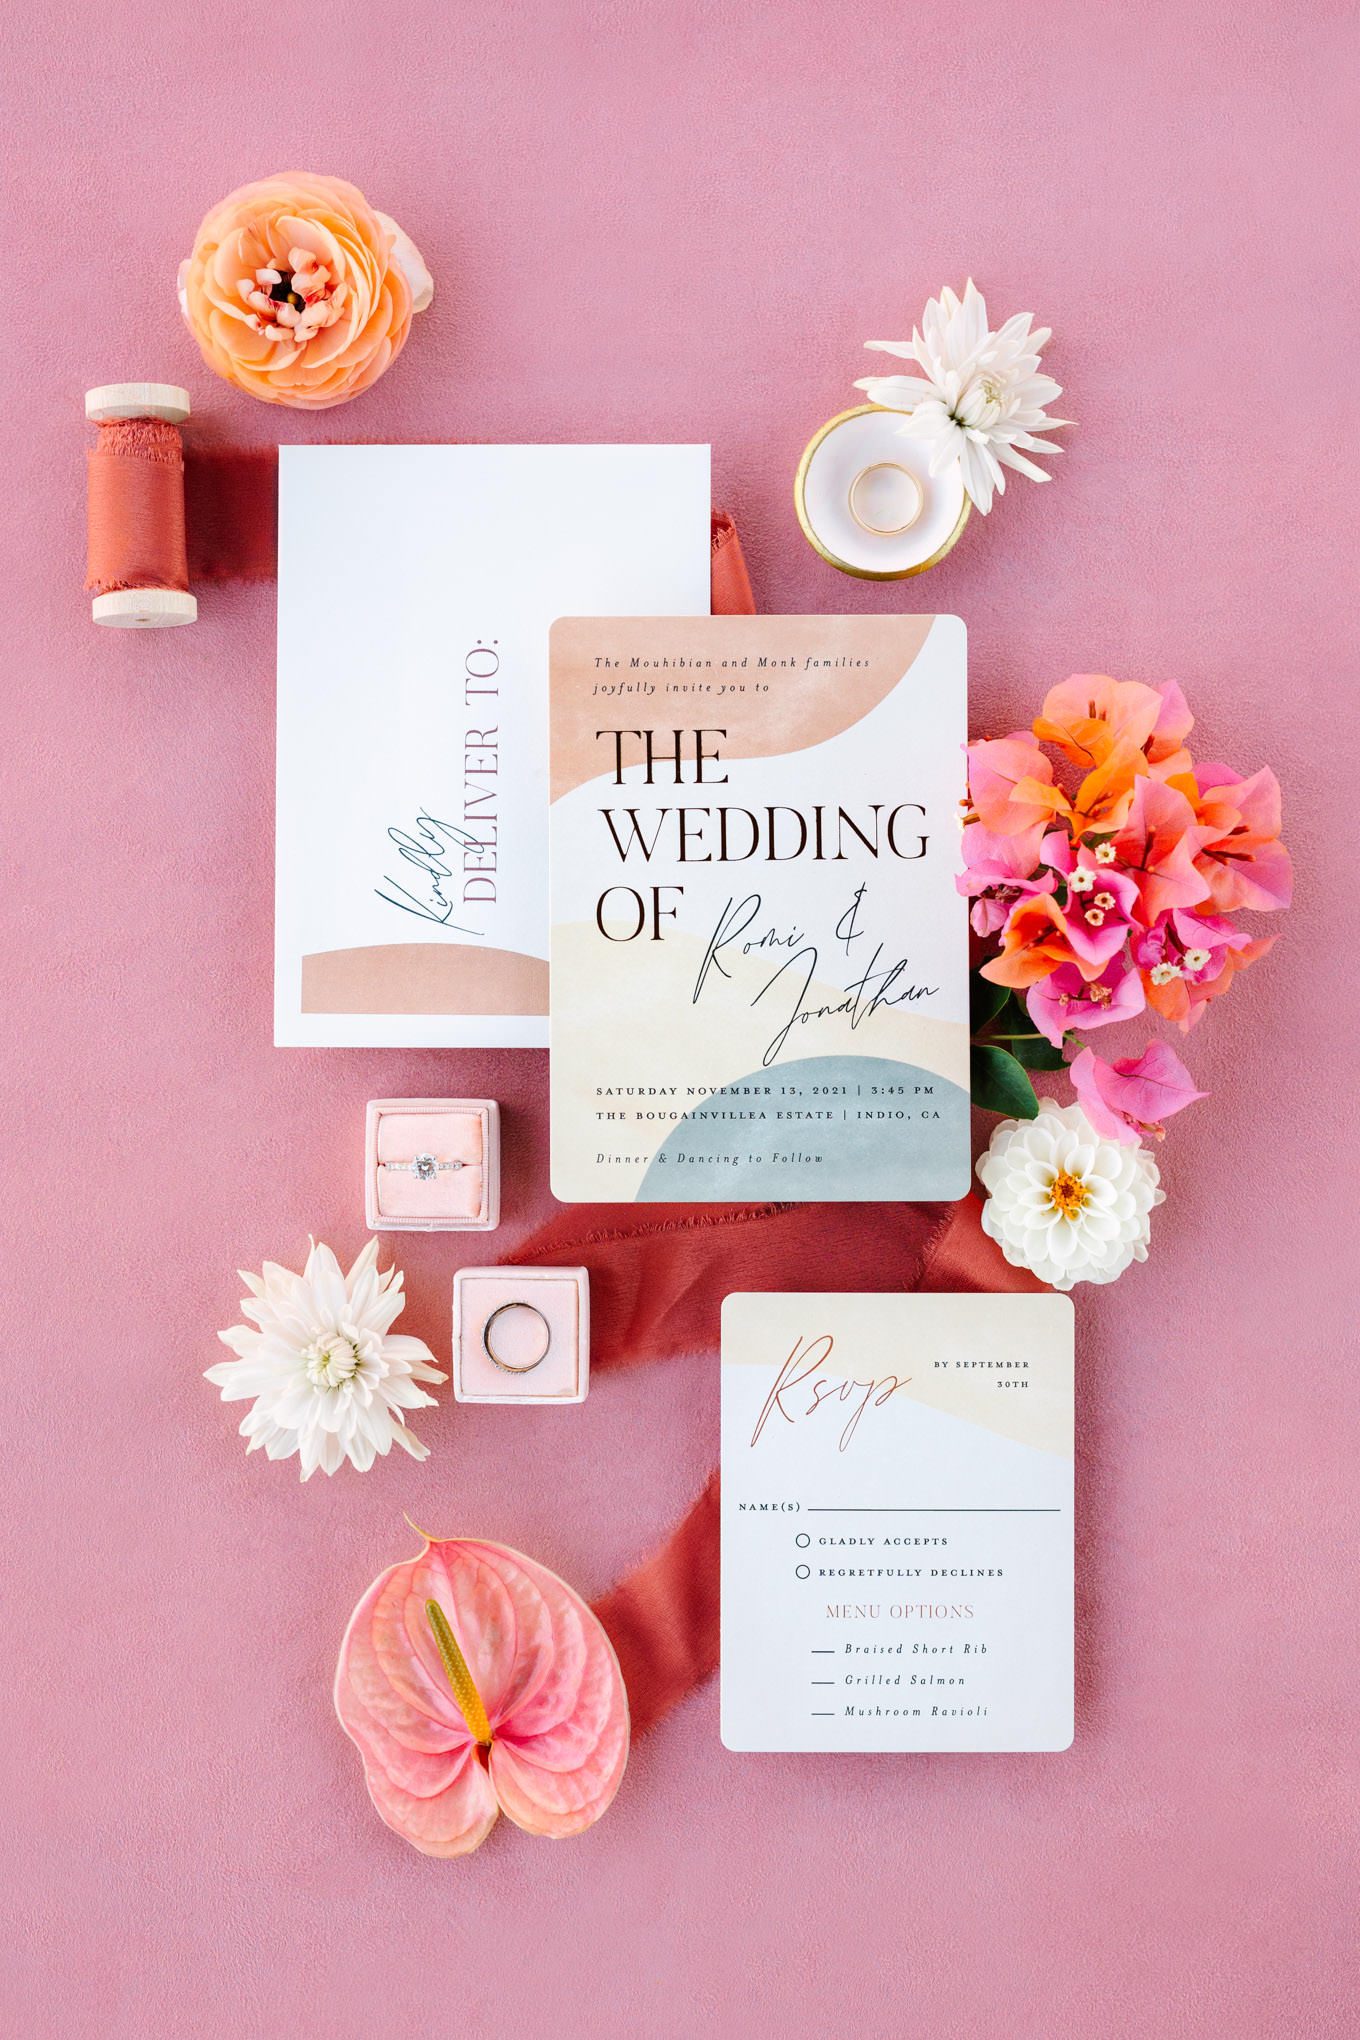 Wedding Invitation | Pink Bougainvillea Estate wedding | Colorful LA wedding photography | #bougainvilleaestate #palmspringswedding #palmspringsweddingvenue #palmspringsphotographer Source: Mary Costa Photography | Los Angeles